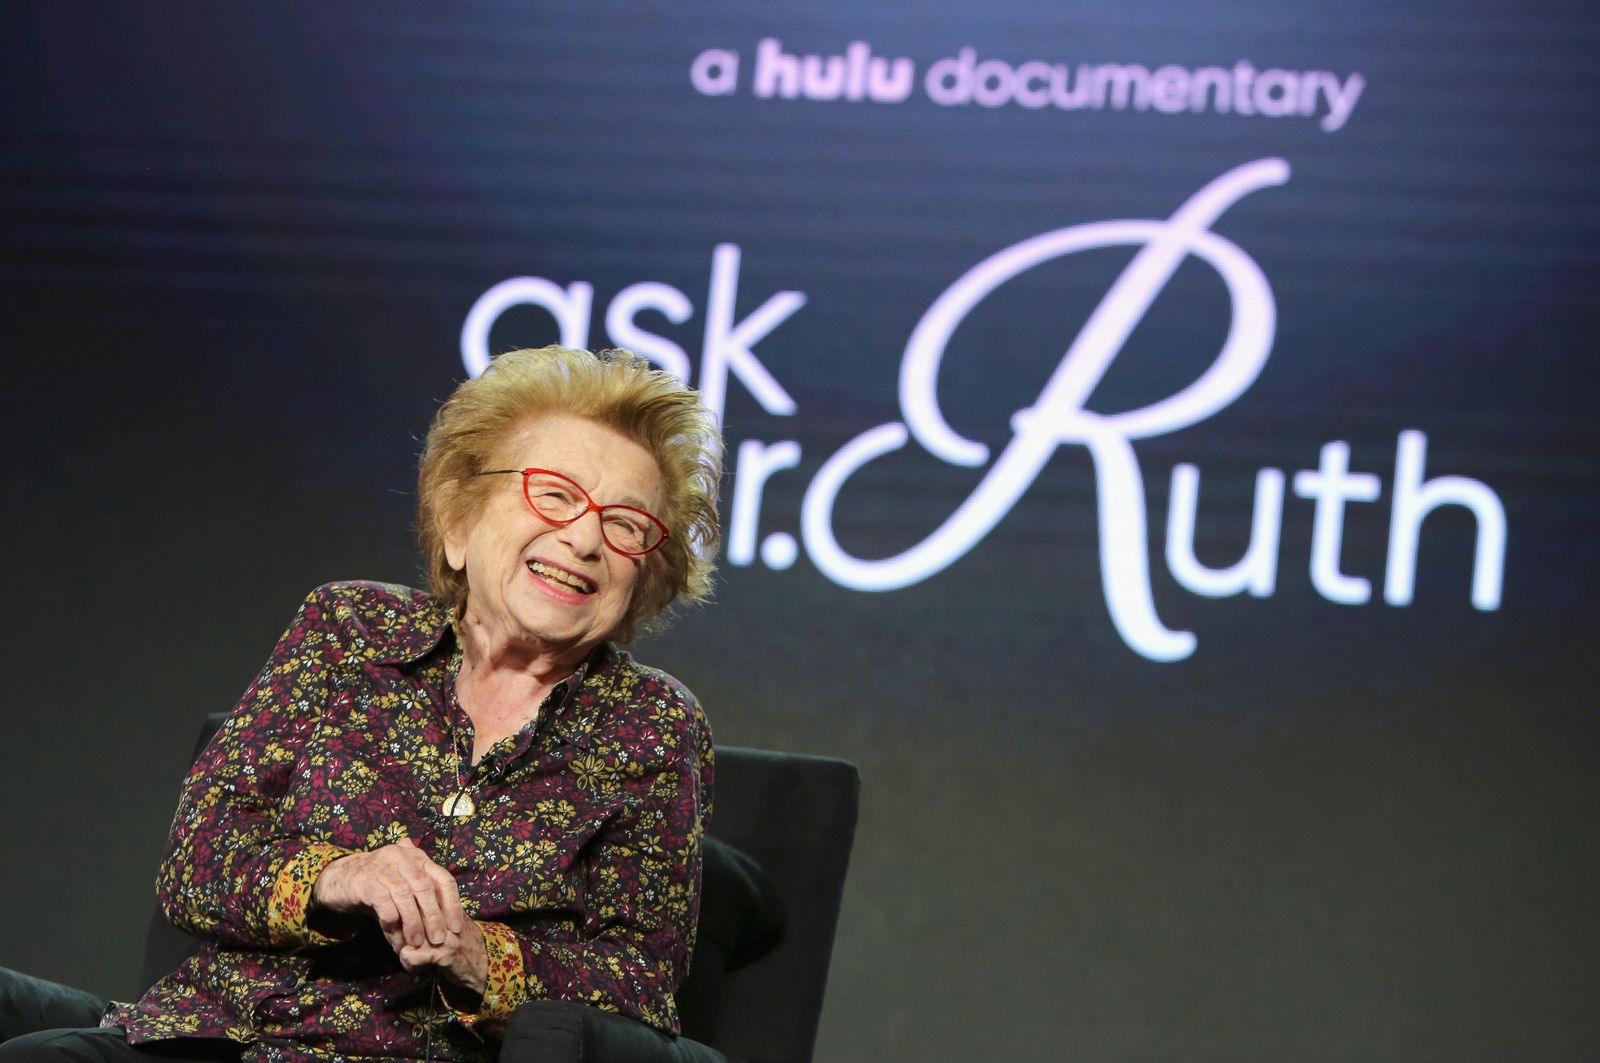 Tg Captions Forced Sex - Dr. Ruth Changed the Way America Talked About Sex | Arts & Culture|  Smithsonian Magazine